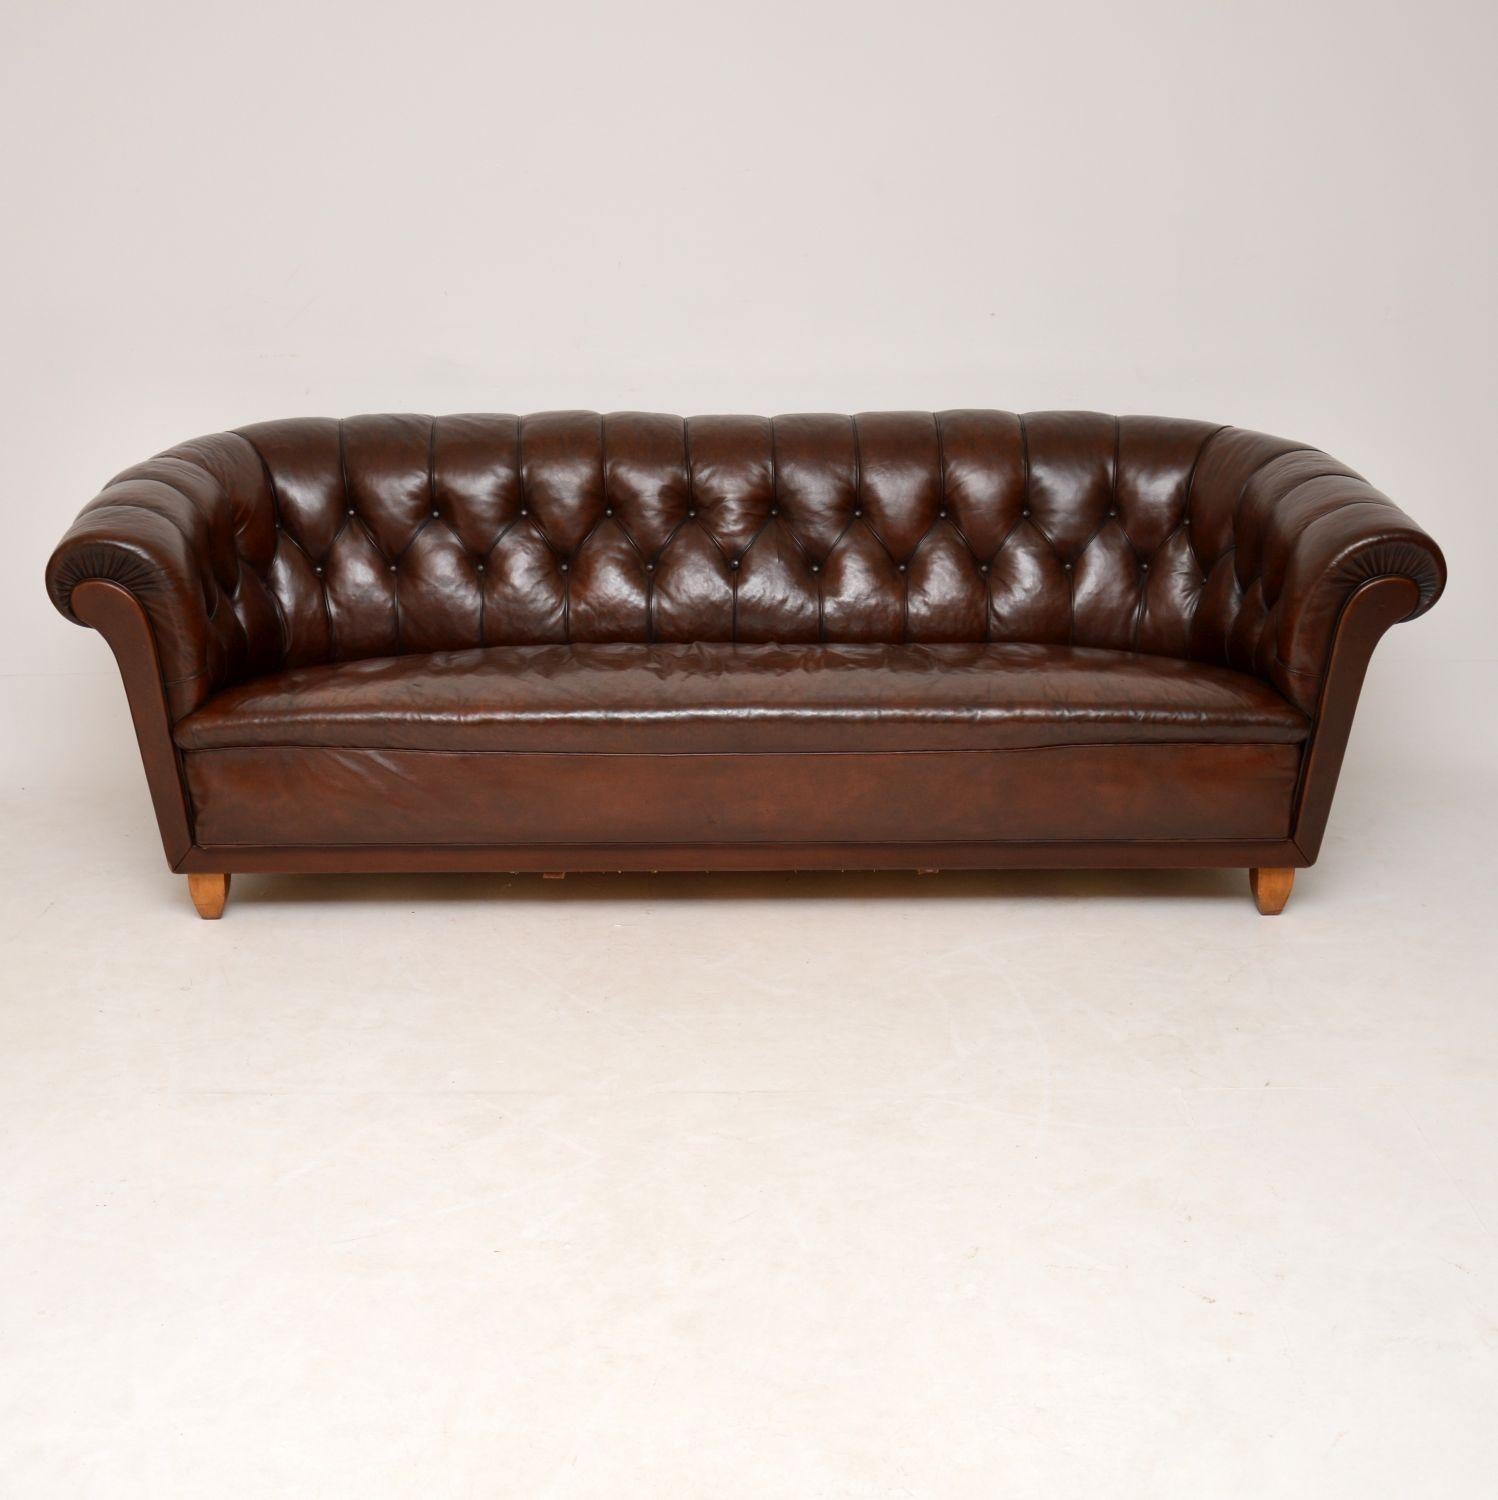 This antique Swedish Chesterfield sofa still has the original leather on it and the color is wonderful. It’s a Swedish take on an English Victorian Chesterfield & is very stylish. The leather is deep buttoned & has been professionally polished,